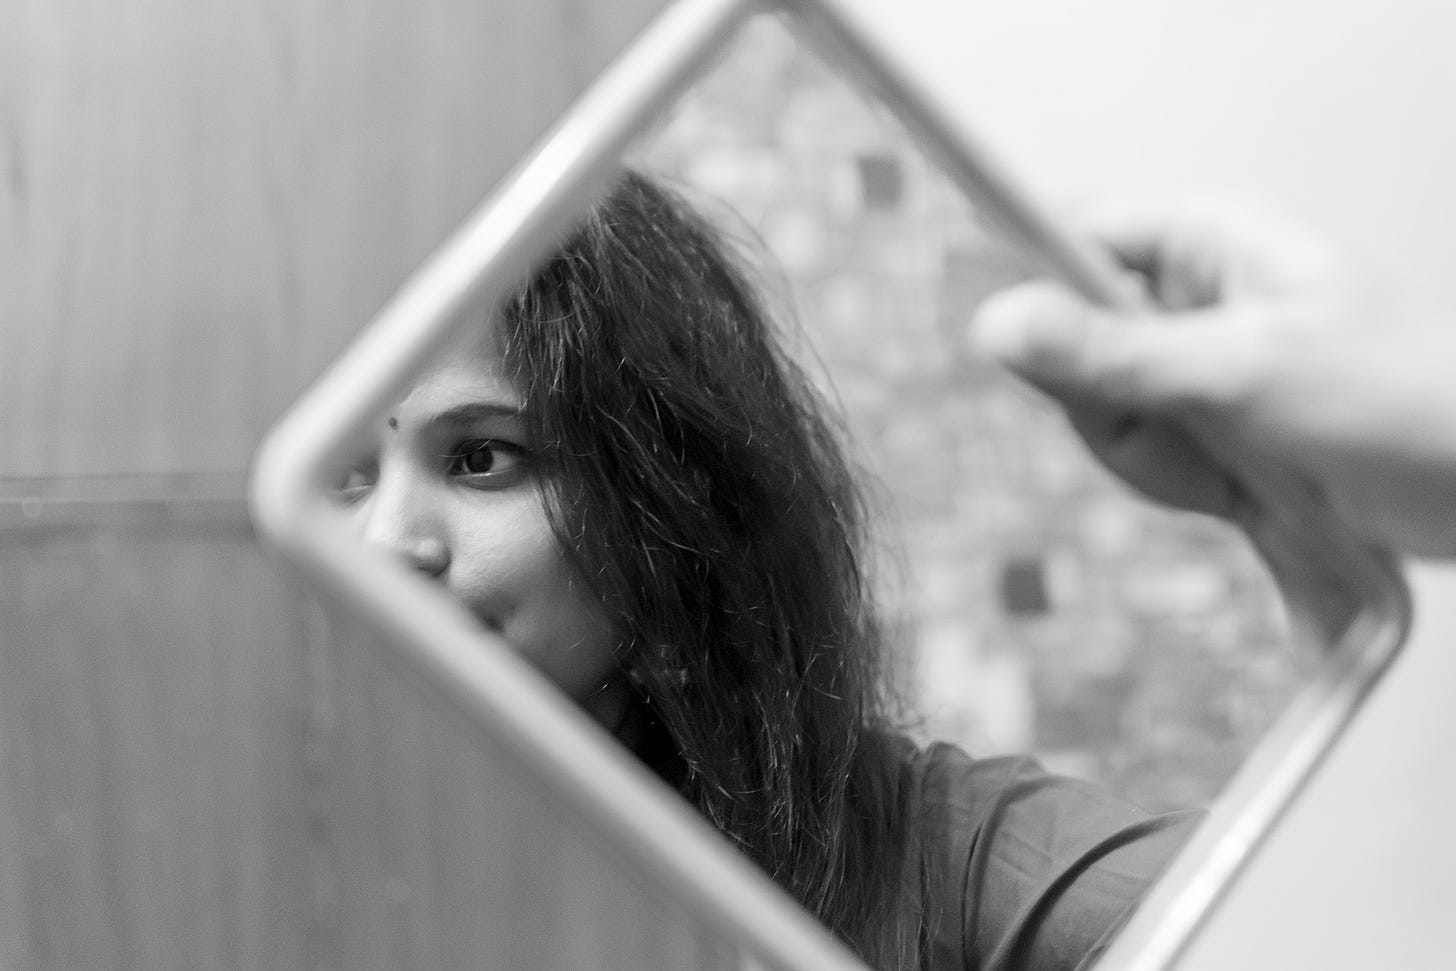 A young girl holds a mirror but is distracted and looks beyond.